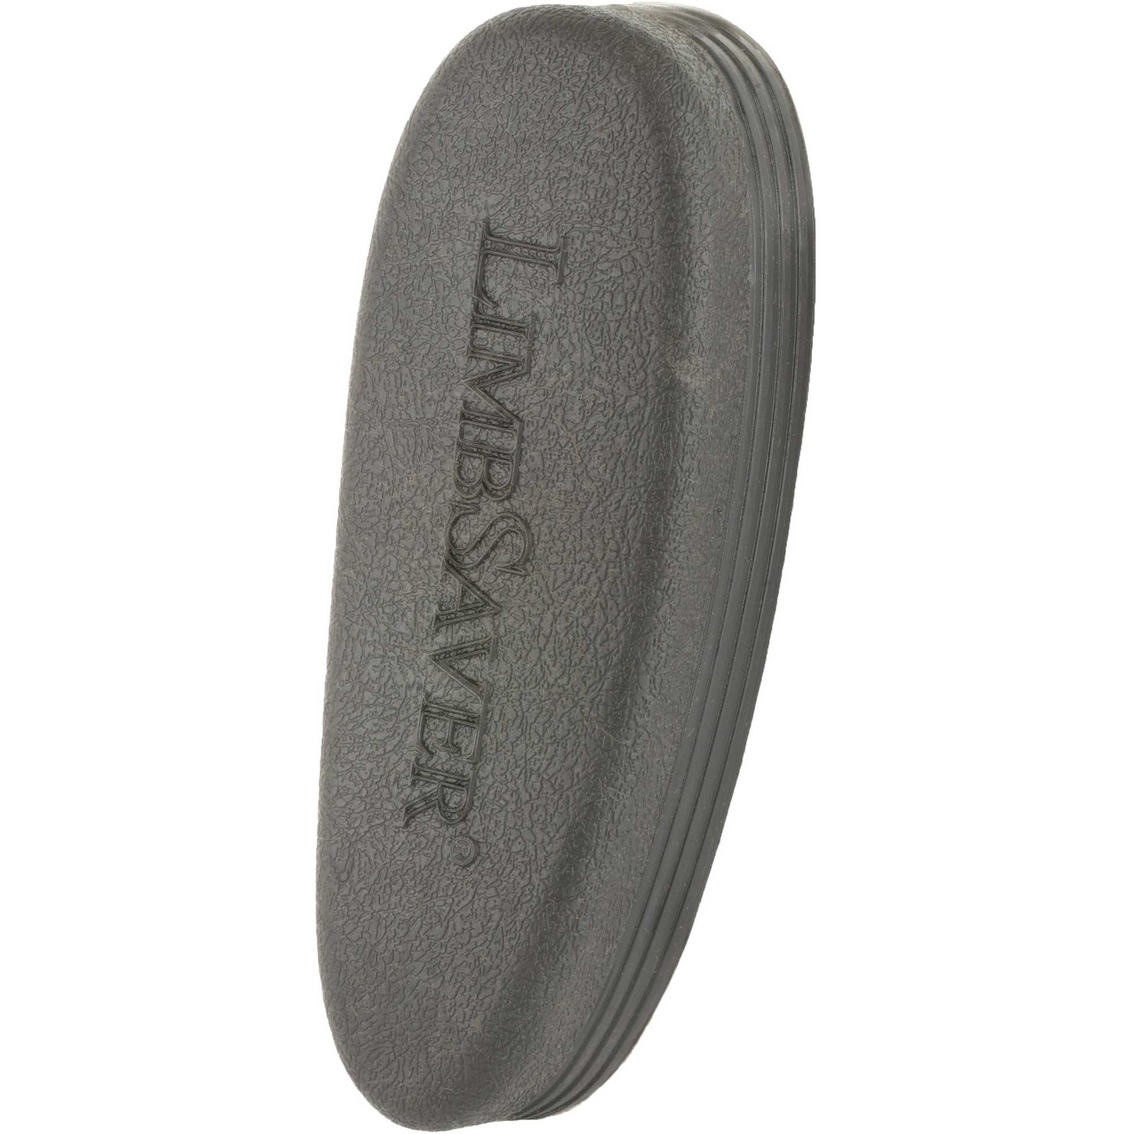 LimbSaver Snap-On Recoil Pad Fits AR-15 M4 Stock Black - Image 2 of 2